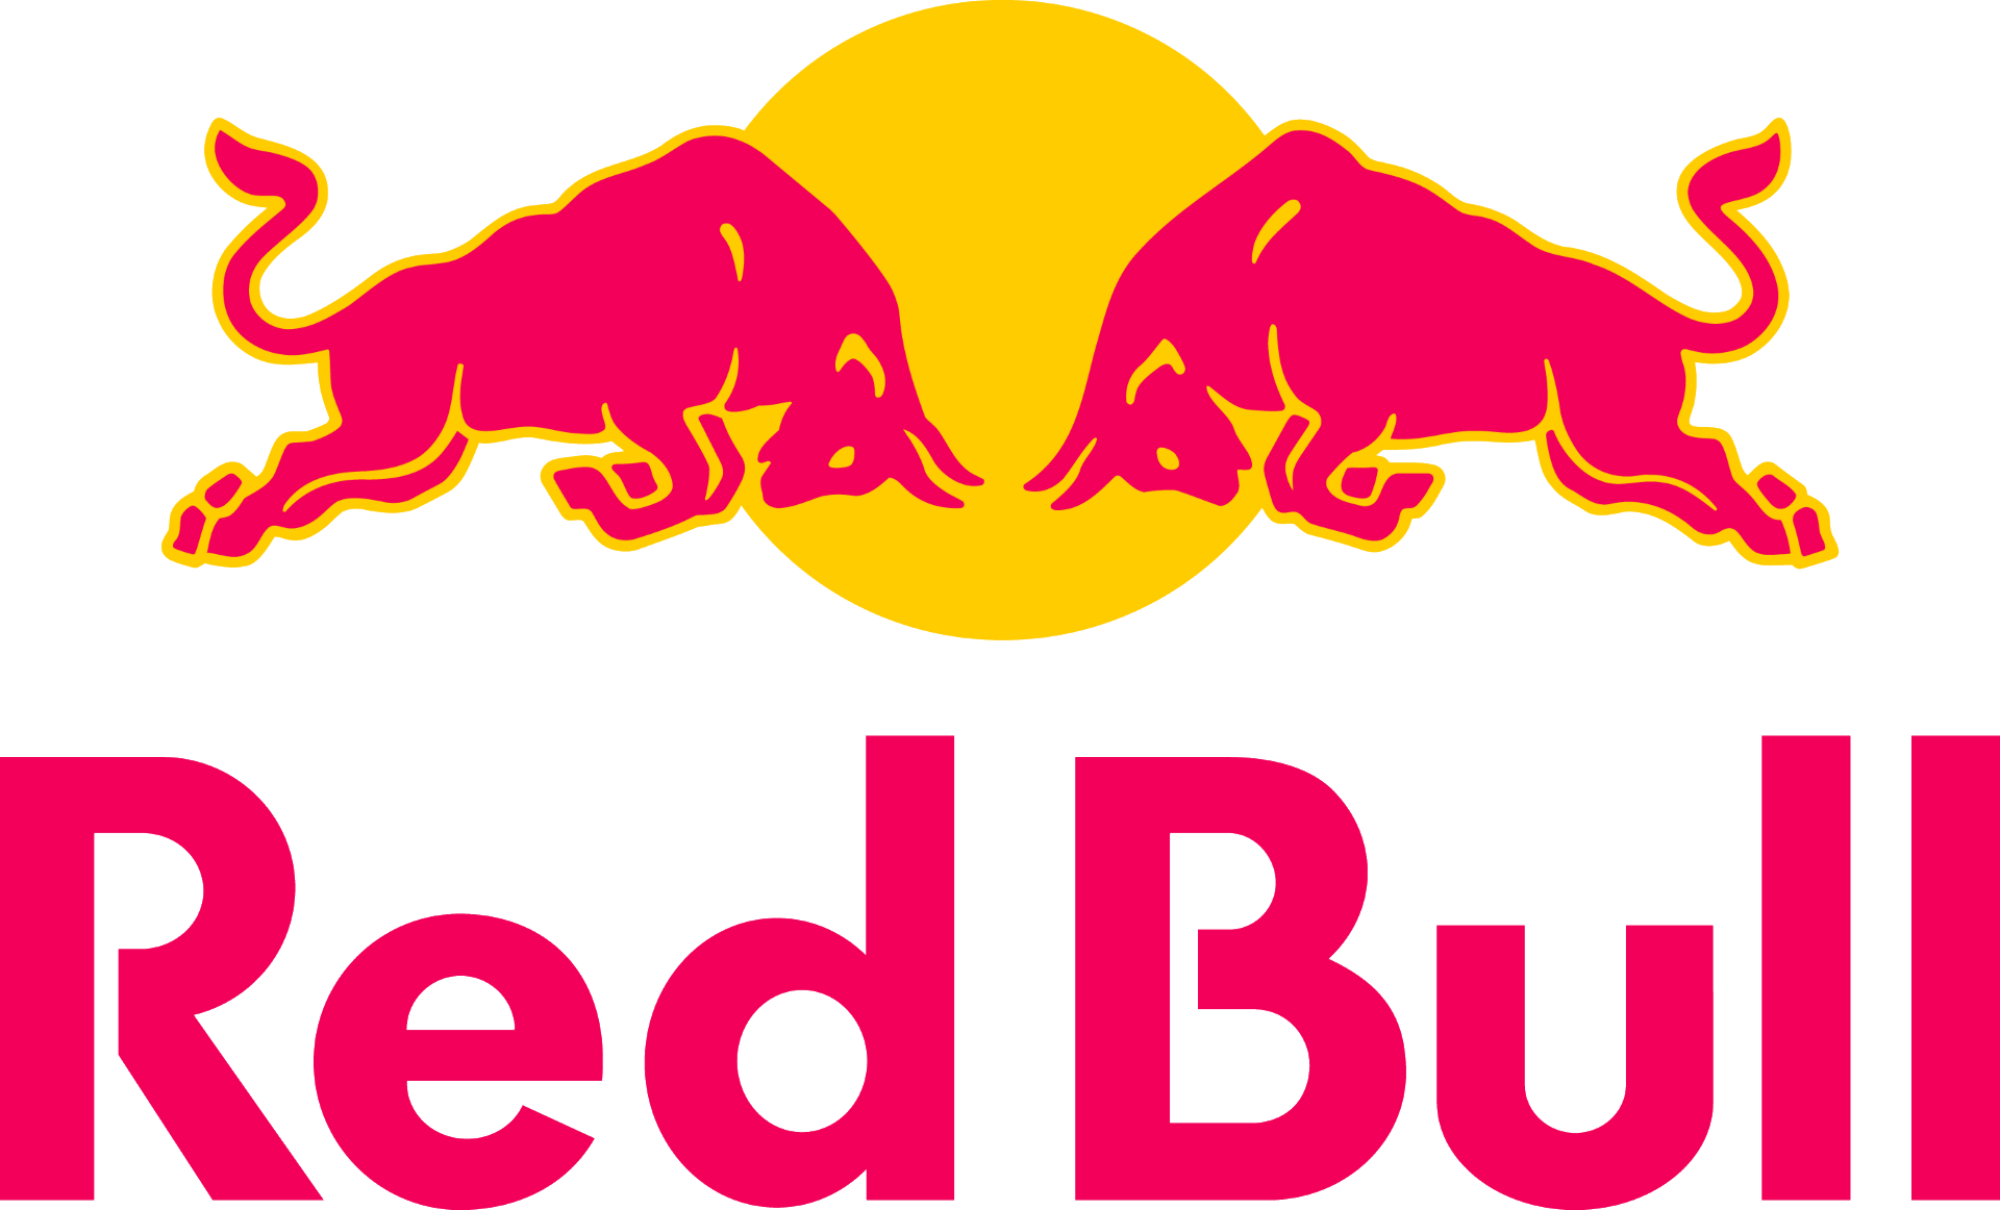 Red Bull is an energy drink sold by Red Bull GmbH, an Austrian company created in 1987.